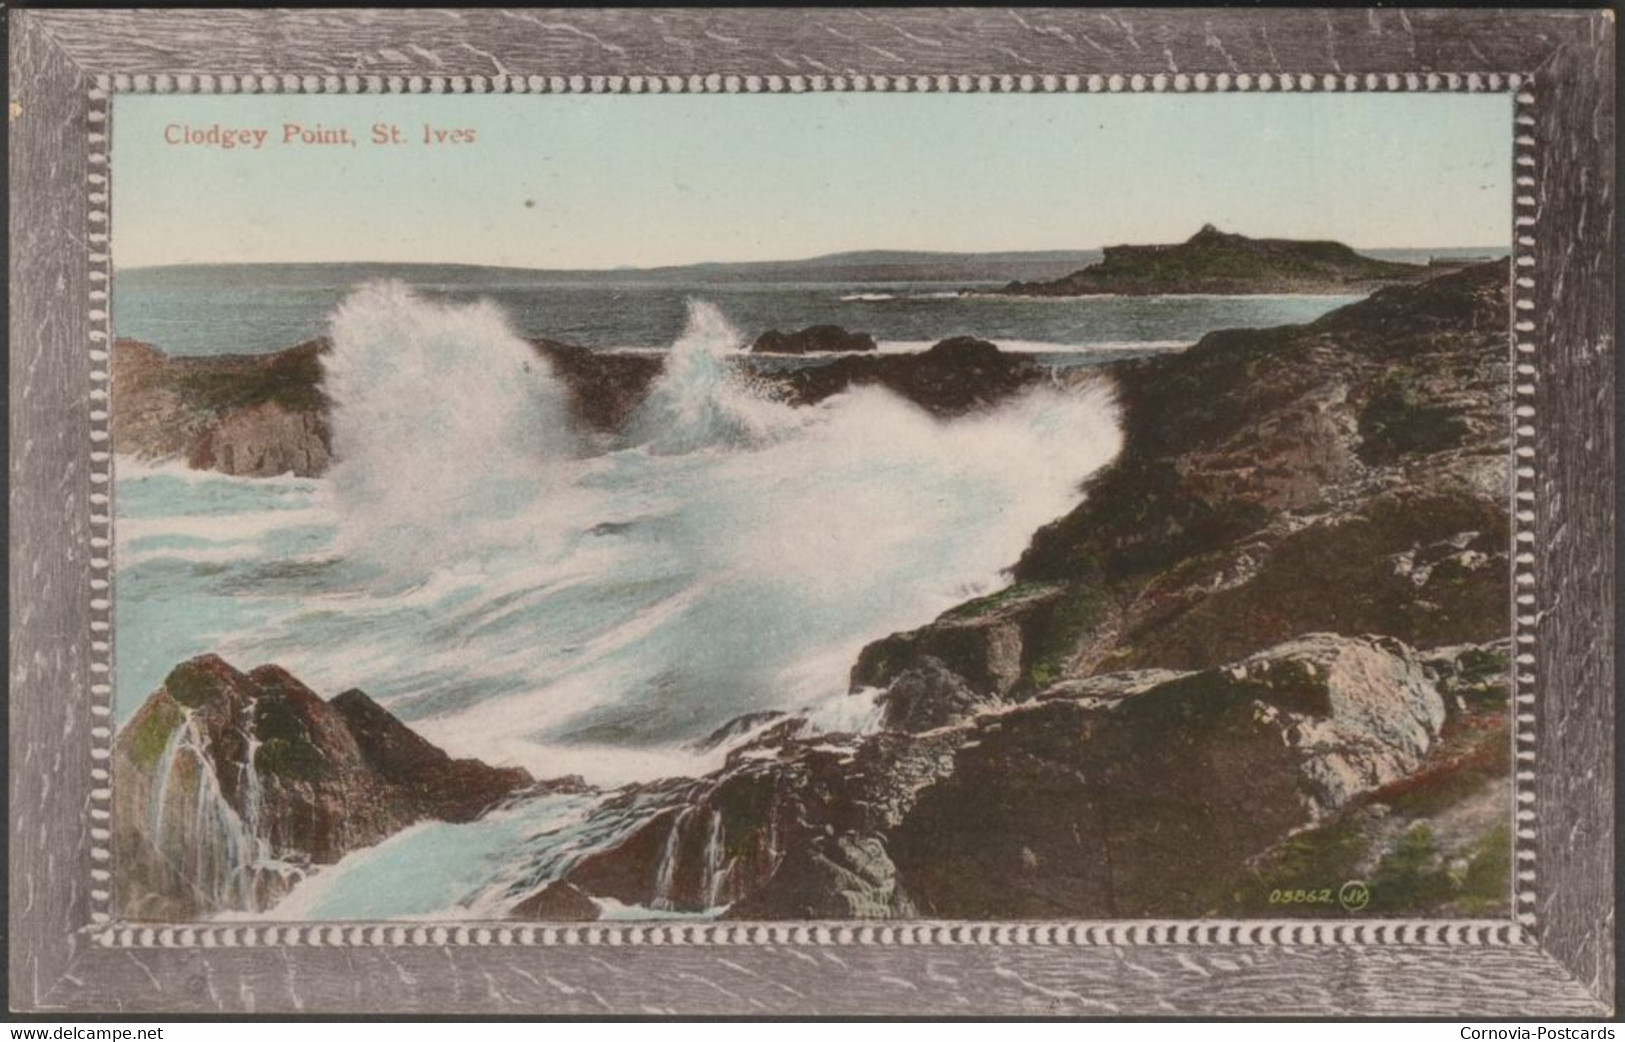 Clodgy Point, St Ives, Cornwall, 1919 - Valentine's Postcard - St.Ives